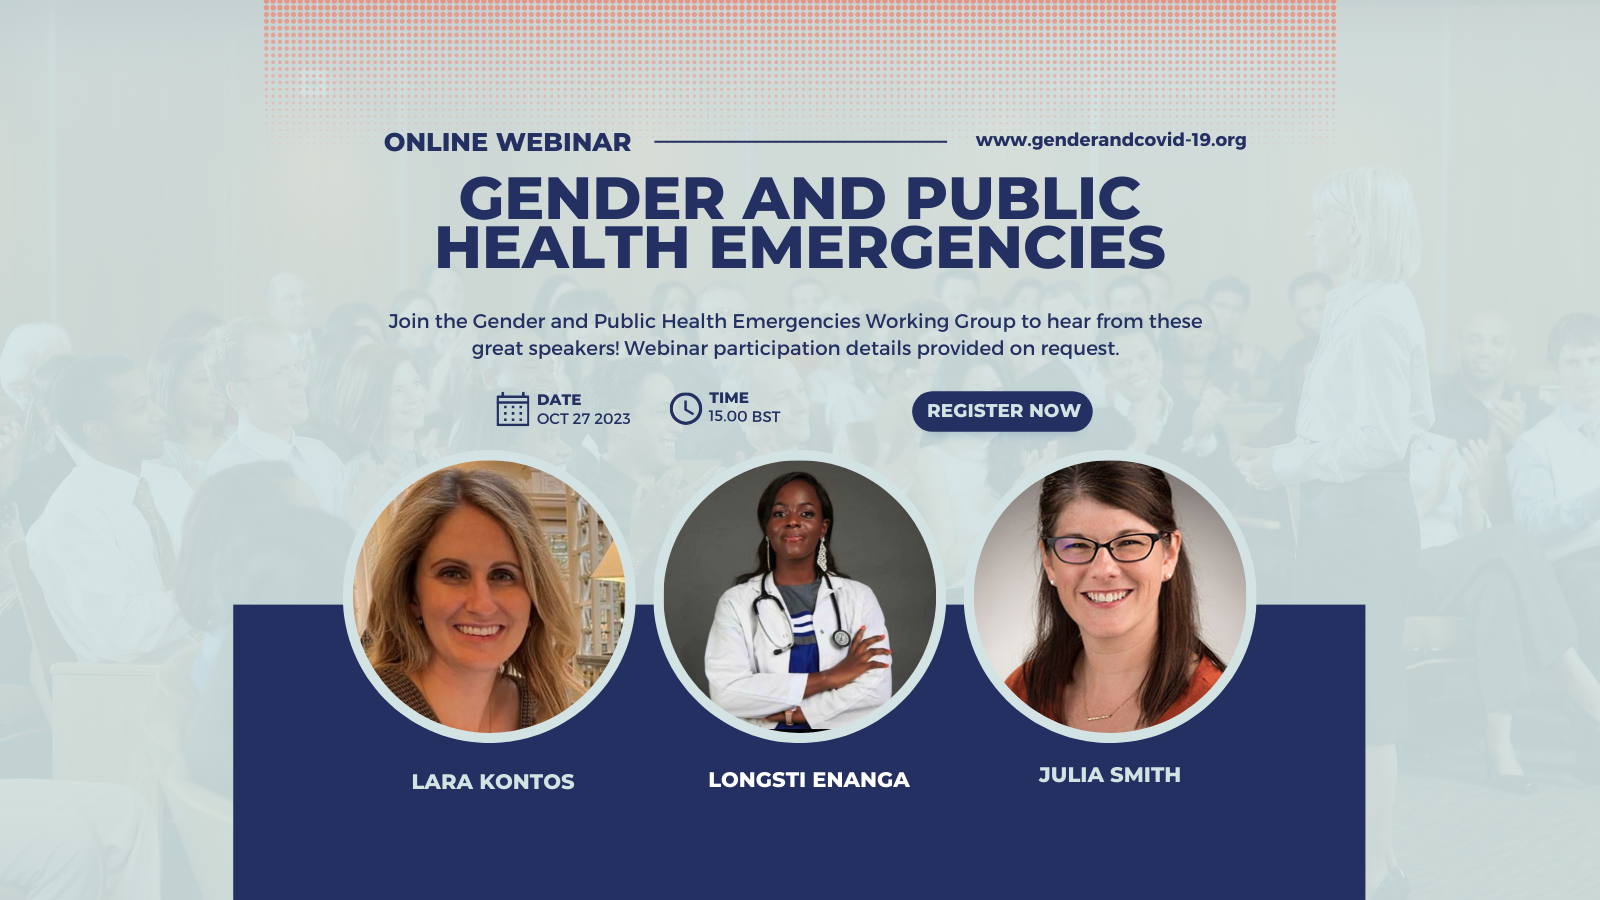 Come along to the Gender and Public Health Emergencies Working Group webinar!